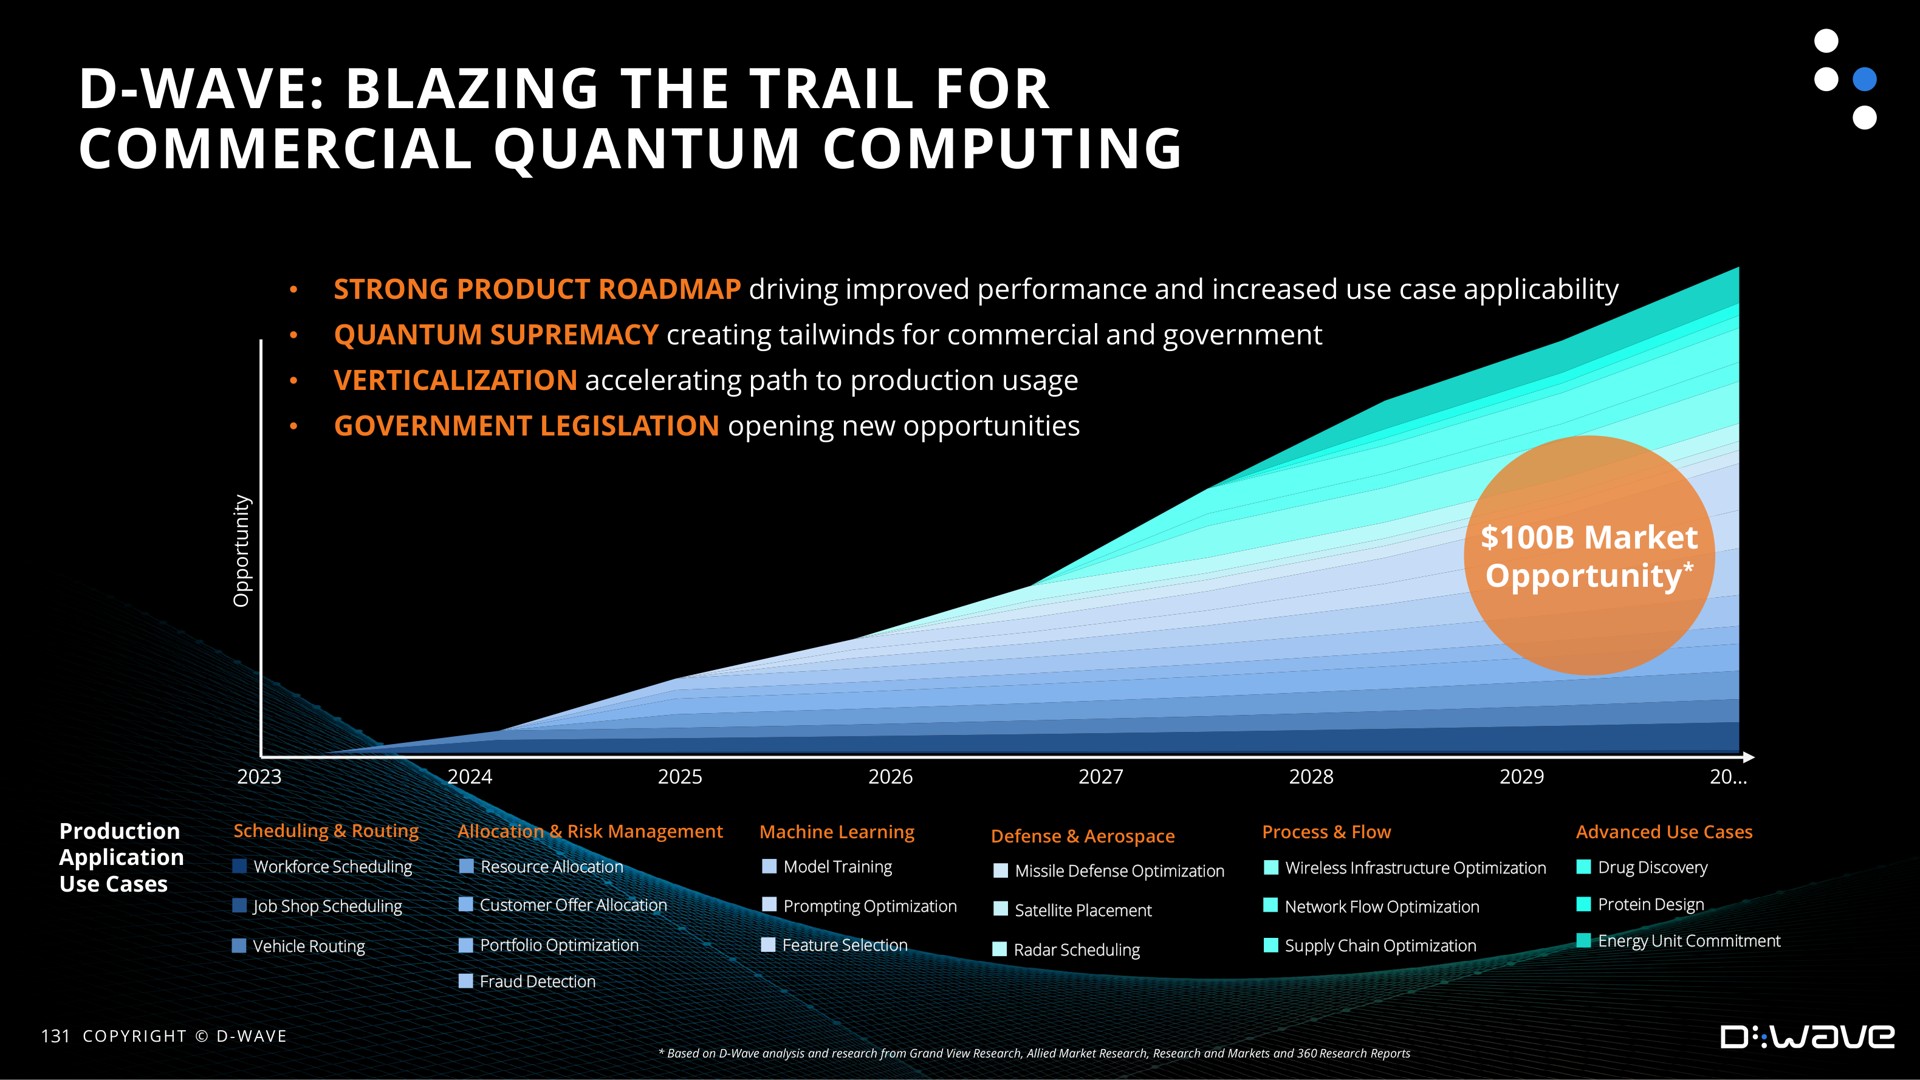 wave blazing the trail for commercial quantum computing | D-Wave